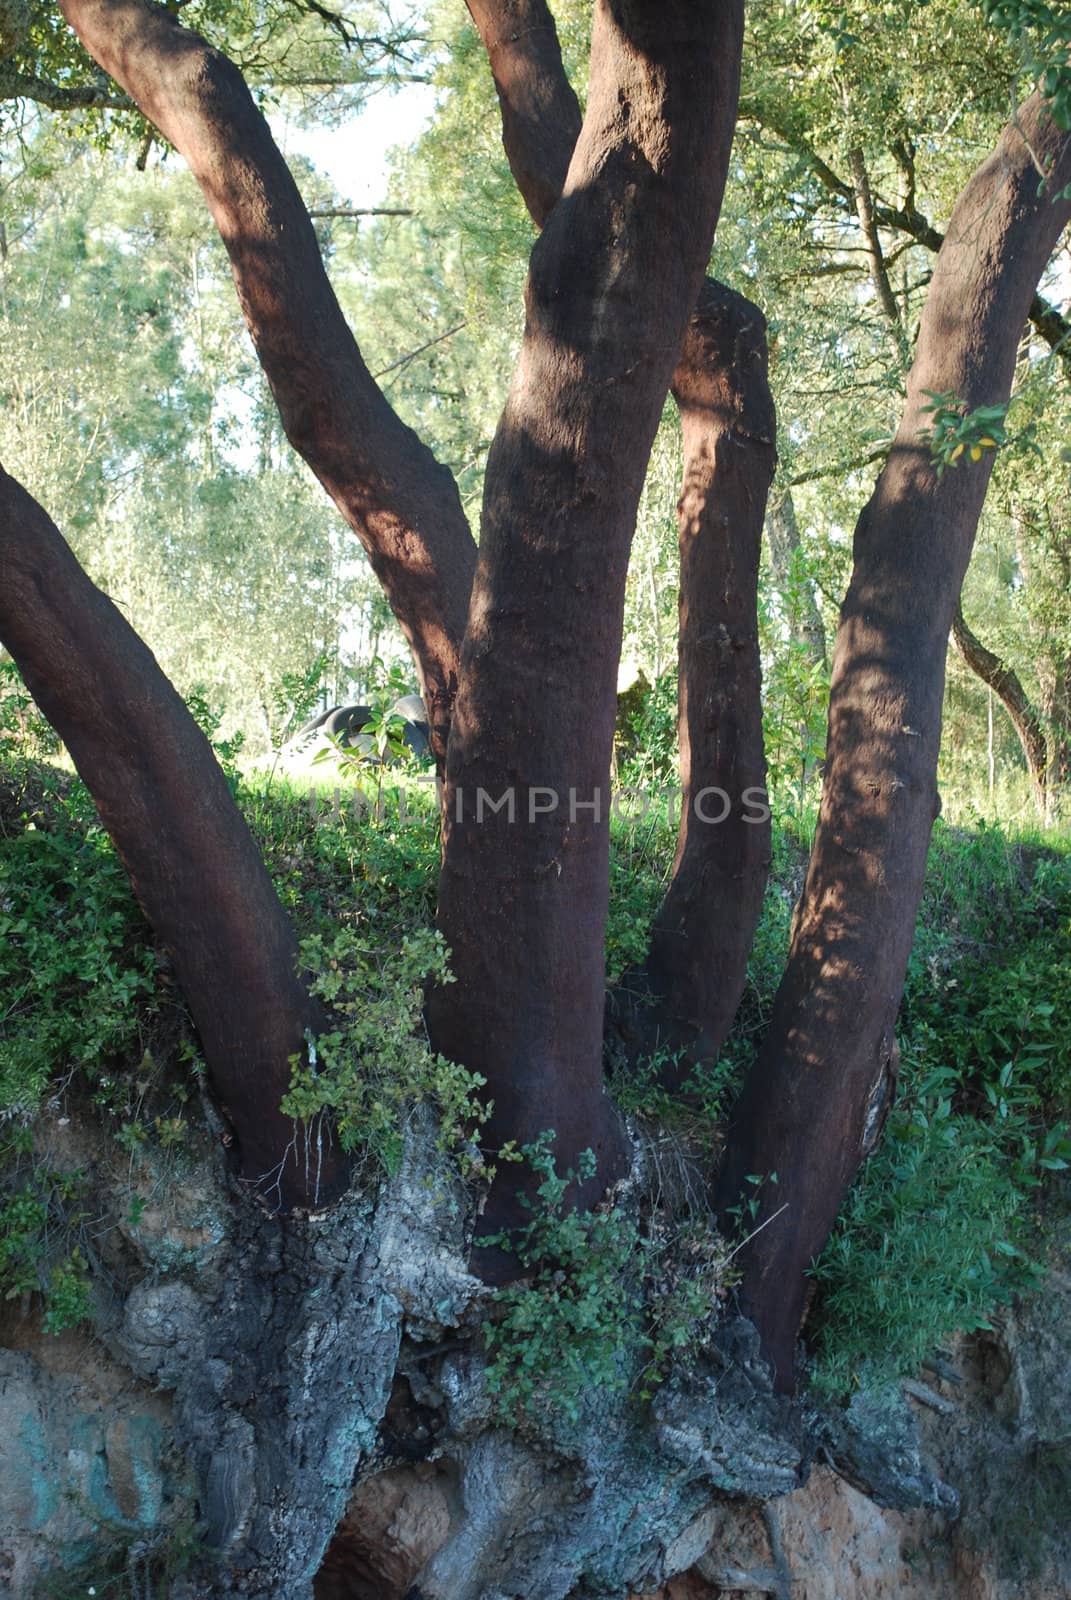 cultural heritage and protected tree in Alentejo